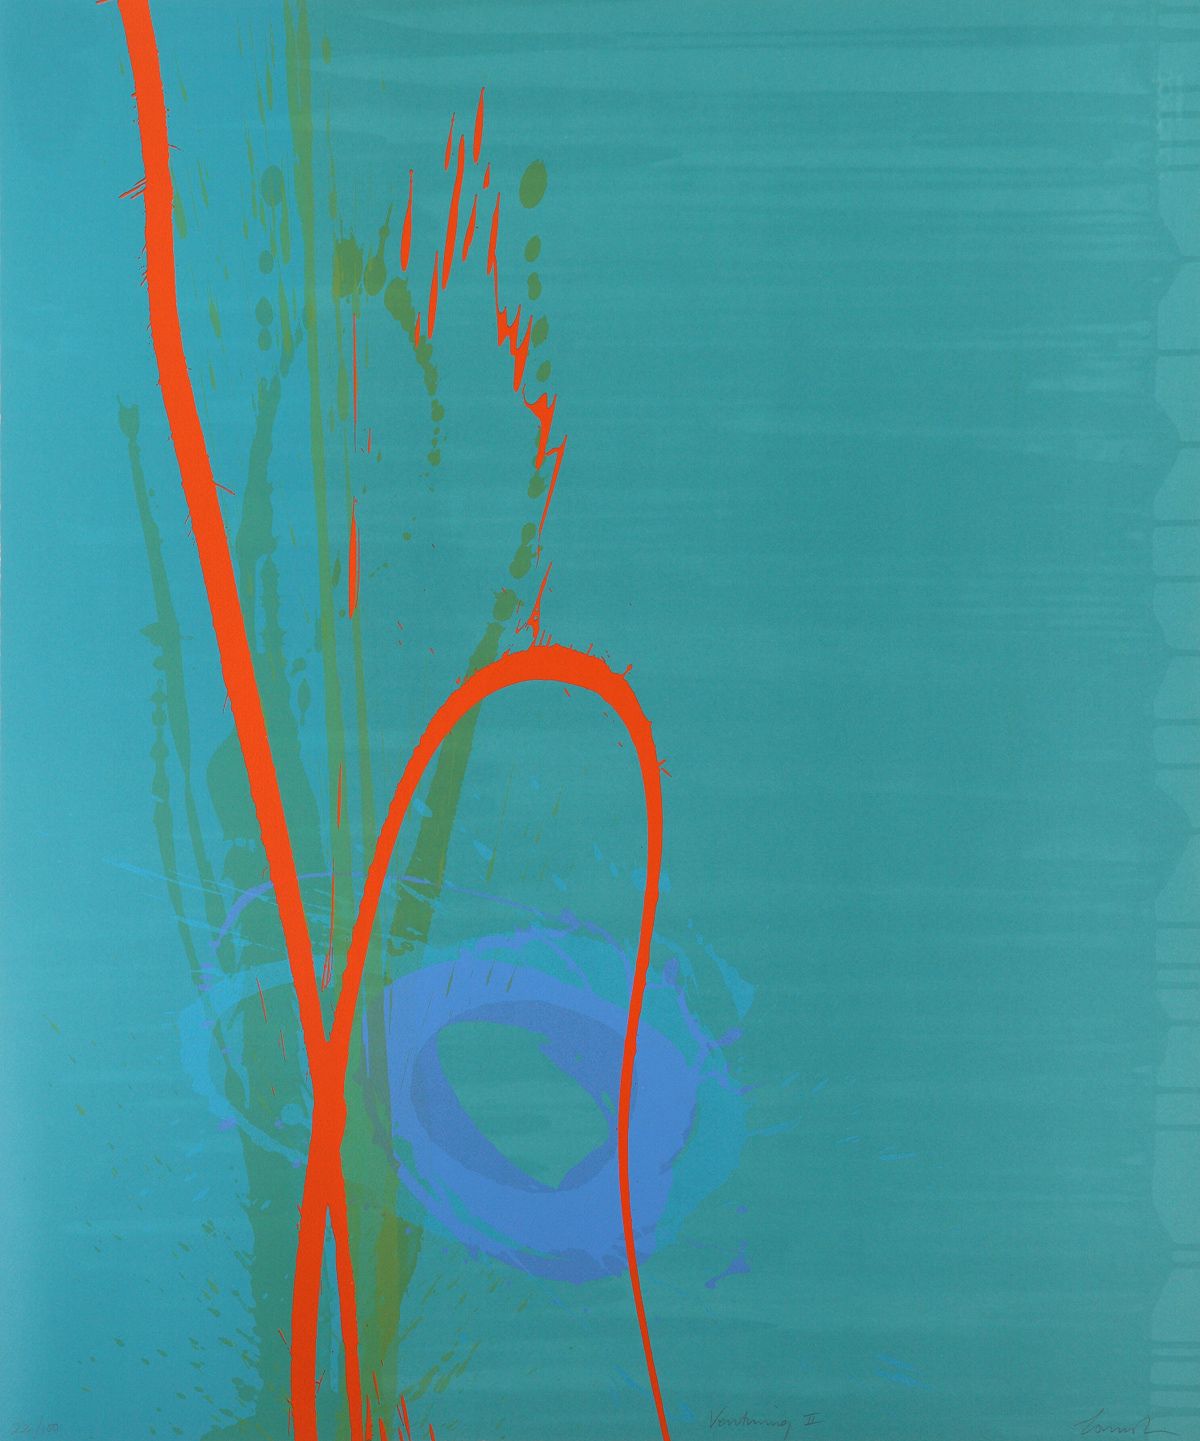 Charlotte-Cornish-VenturingII-Limited-Edition-Silkscreen-Paint-abstract- Bright-Colour-Blue-Red-Green-TAP-Galleries